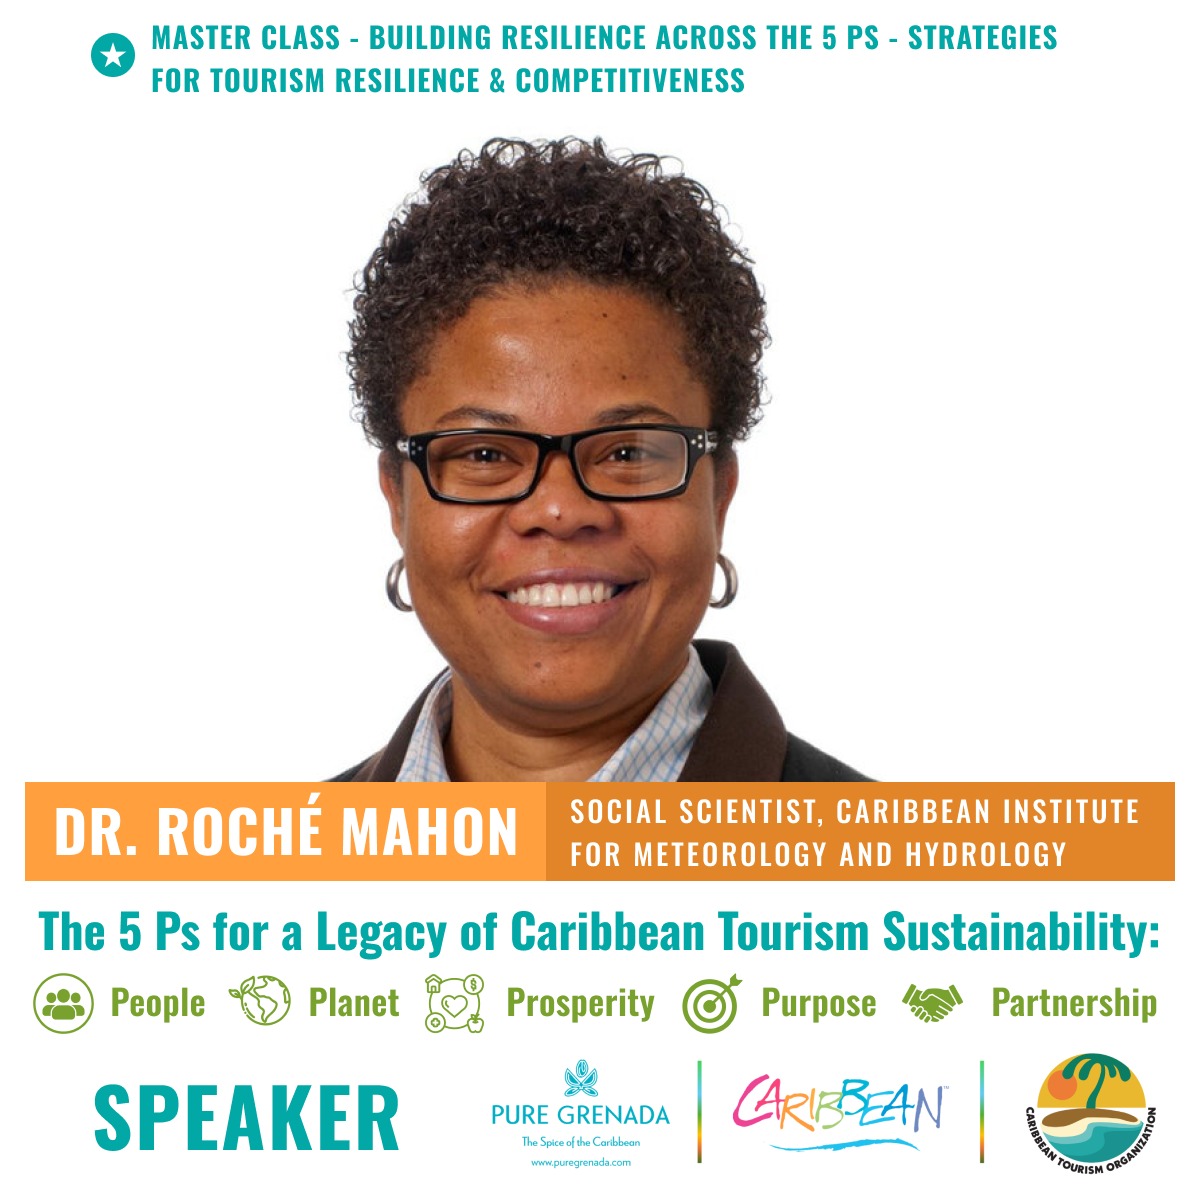 We are honored to have Dr. Roché Mahon, social scientist at the @CIMHbb, join us for a dynamic hands-on session at our annual Caribbean Sustainable Tourism Conference on Monday, April 22. caribbeanstc.com/session/master…